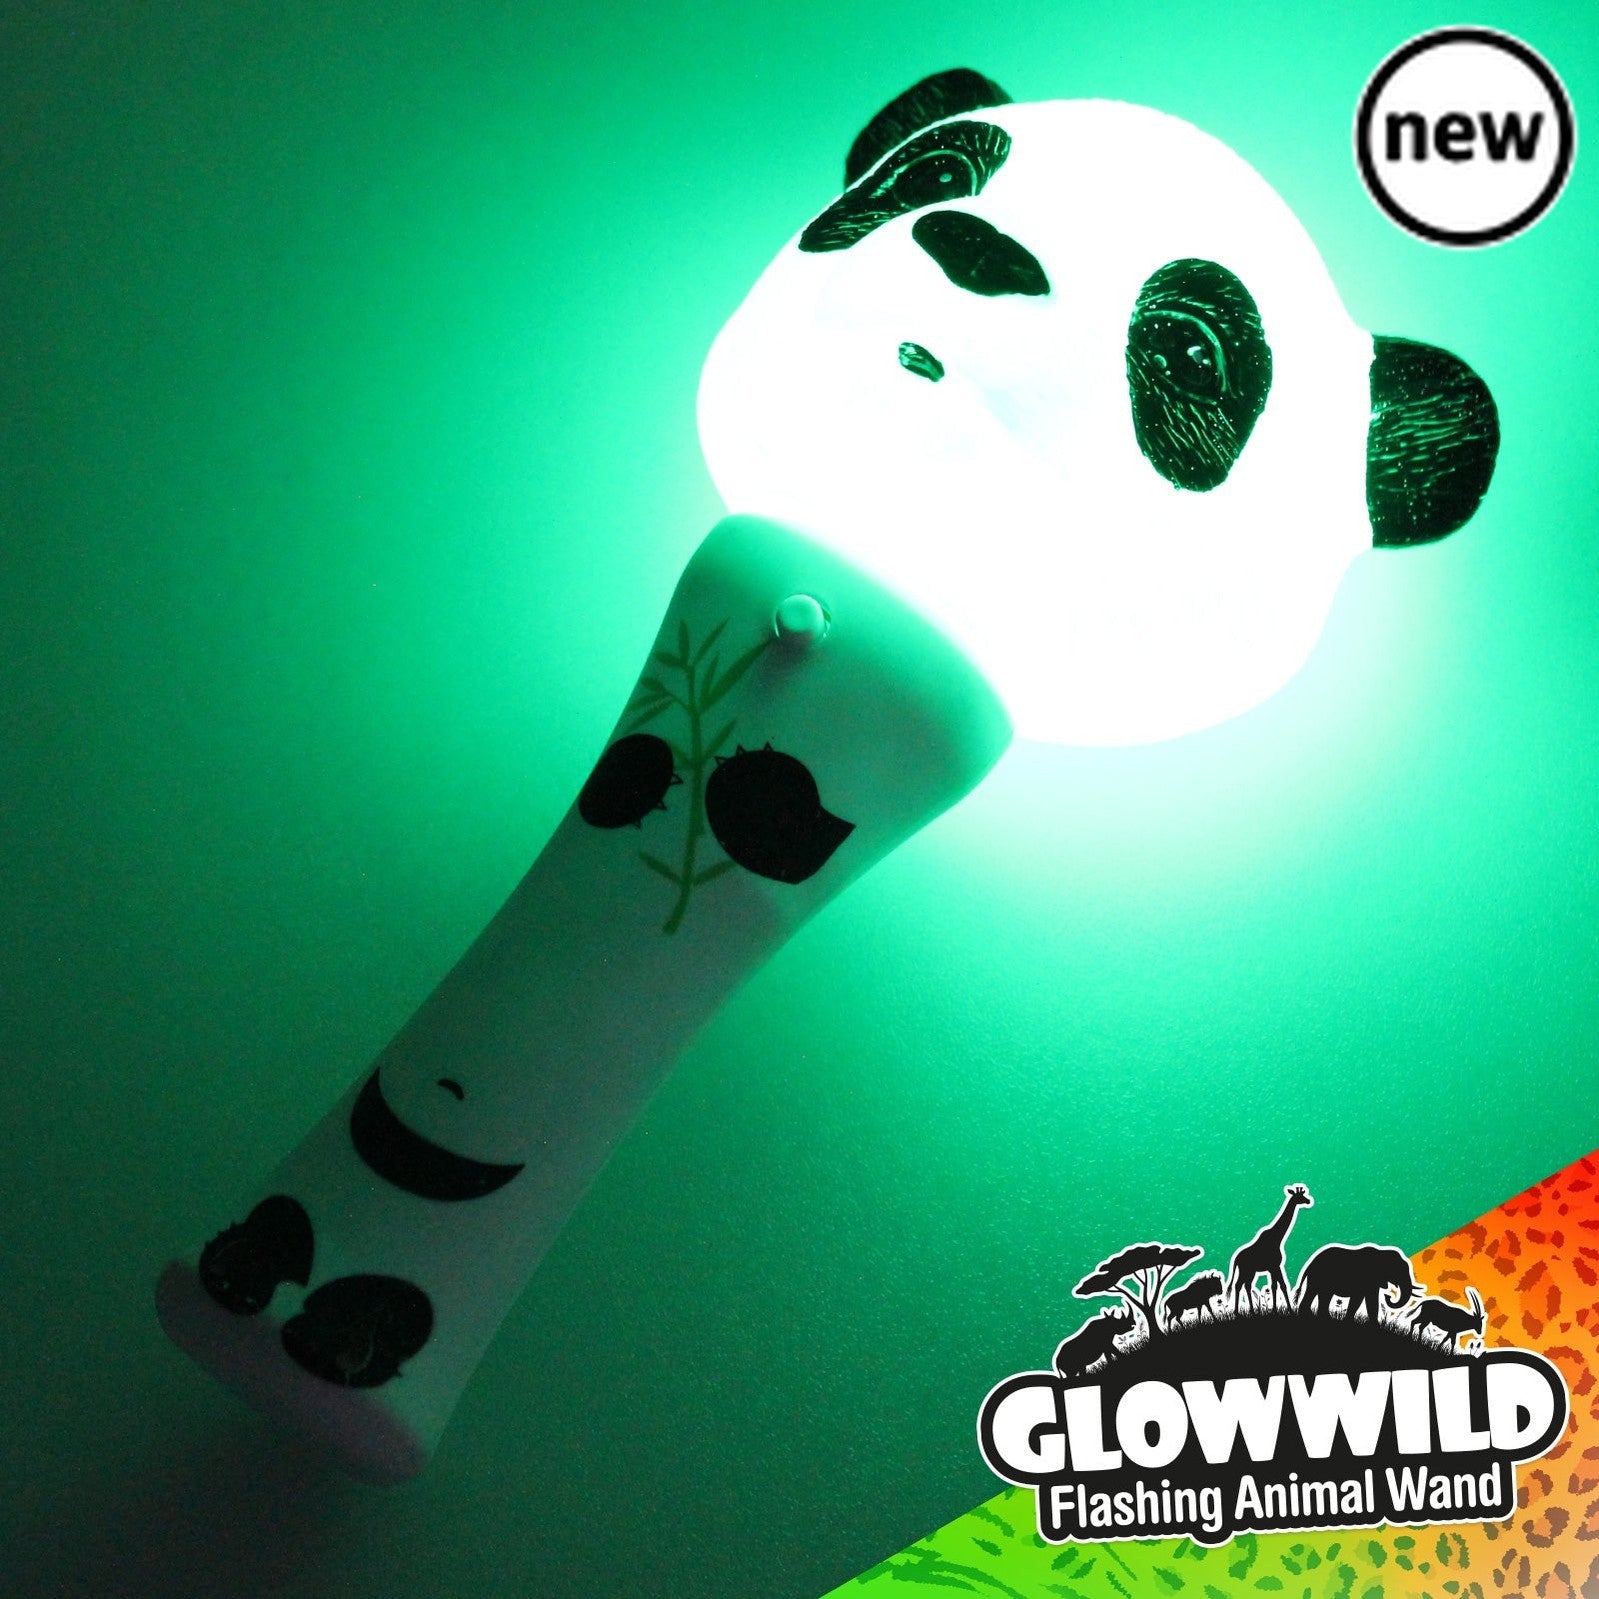 Panda Mini Light Up Animal Wand 7", Cuteness overload!! This adorable Panda Mini Light Up Animal Wand is lit with multi coloured flashing LEDs that illuminate the cute panda head in a colour flash light show! An adorable Glow Wild flashing animal wand that's just the right size for small hands, the simple on/off function makes it easy for even the smallest of kids to handle. With batteries included, this super sweet Panda Mini Light Up Animal Wand will delight with mesmerising colourful light! Panda Mini Li